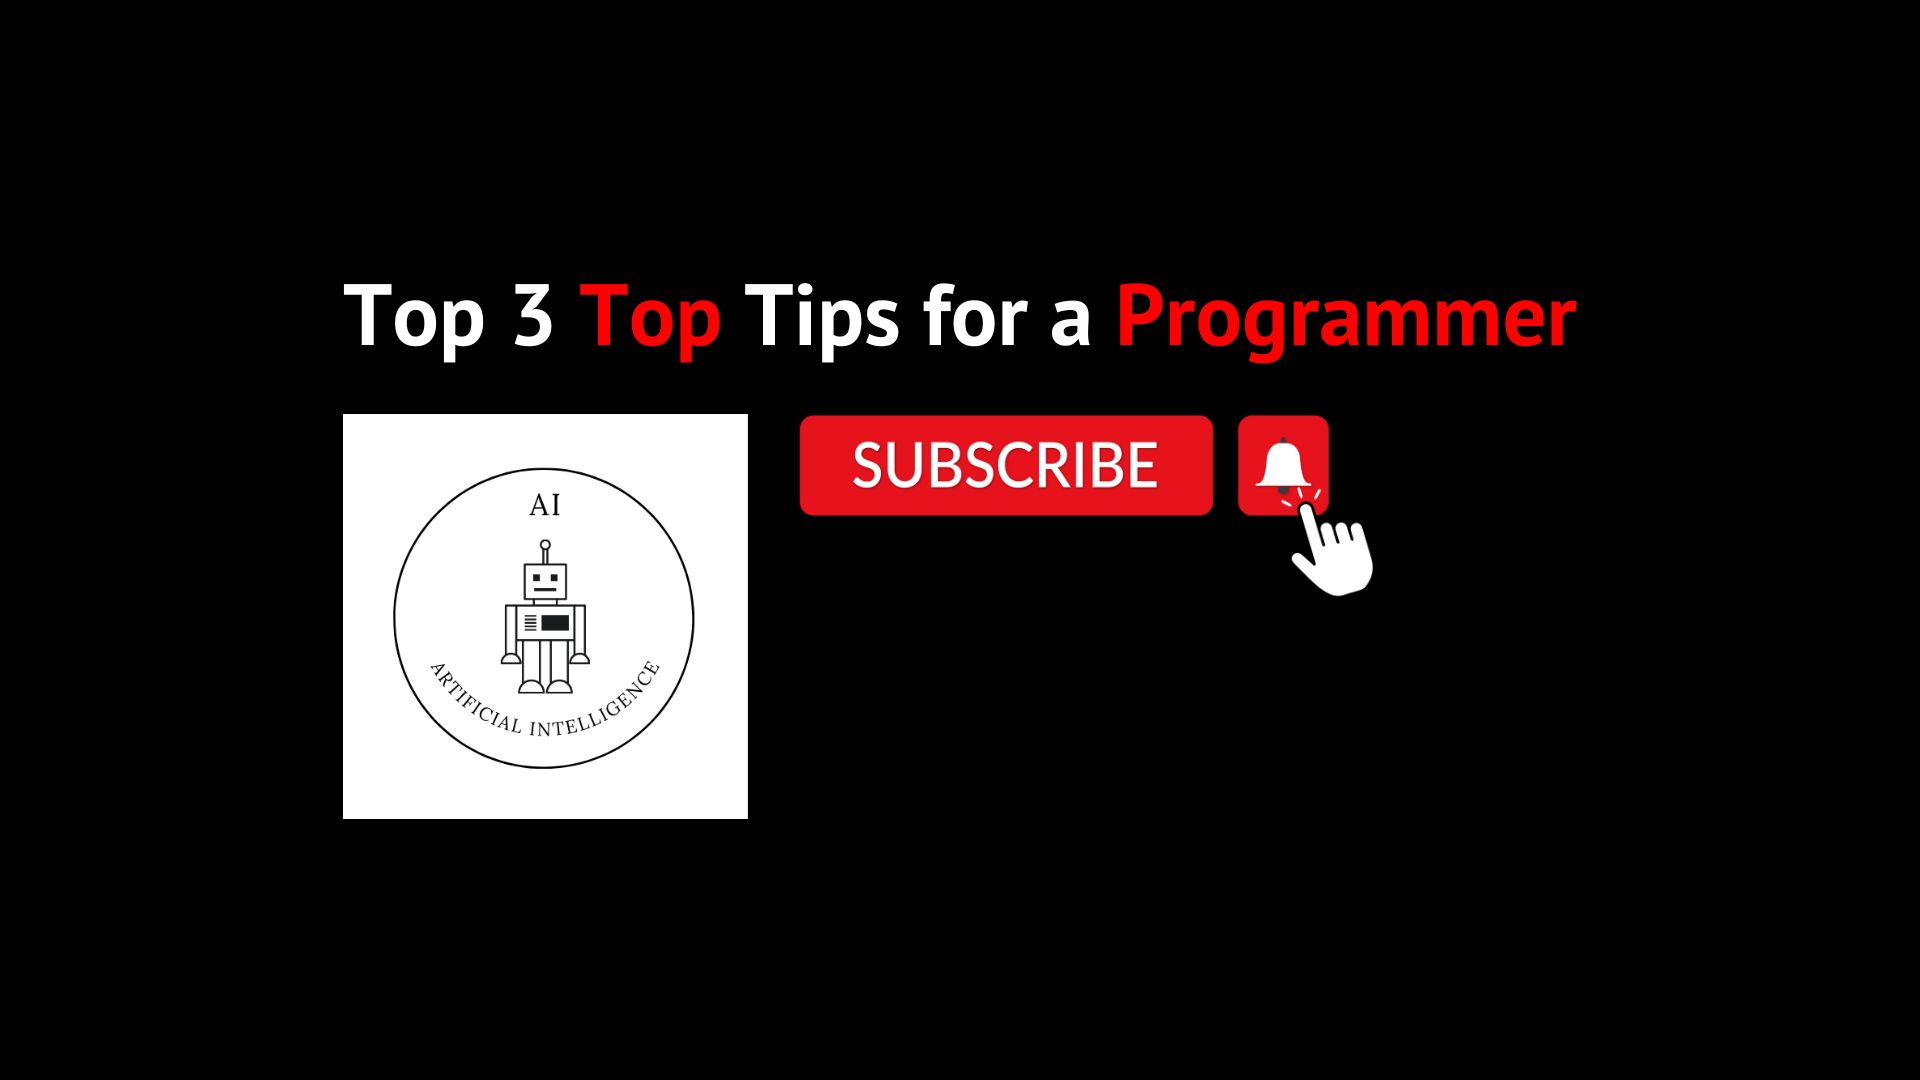 Top 3 Top Tips for a Programmer